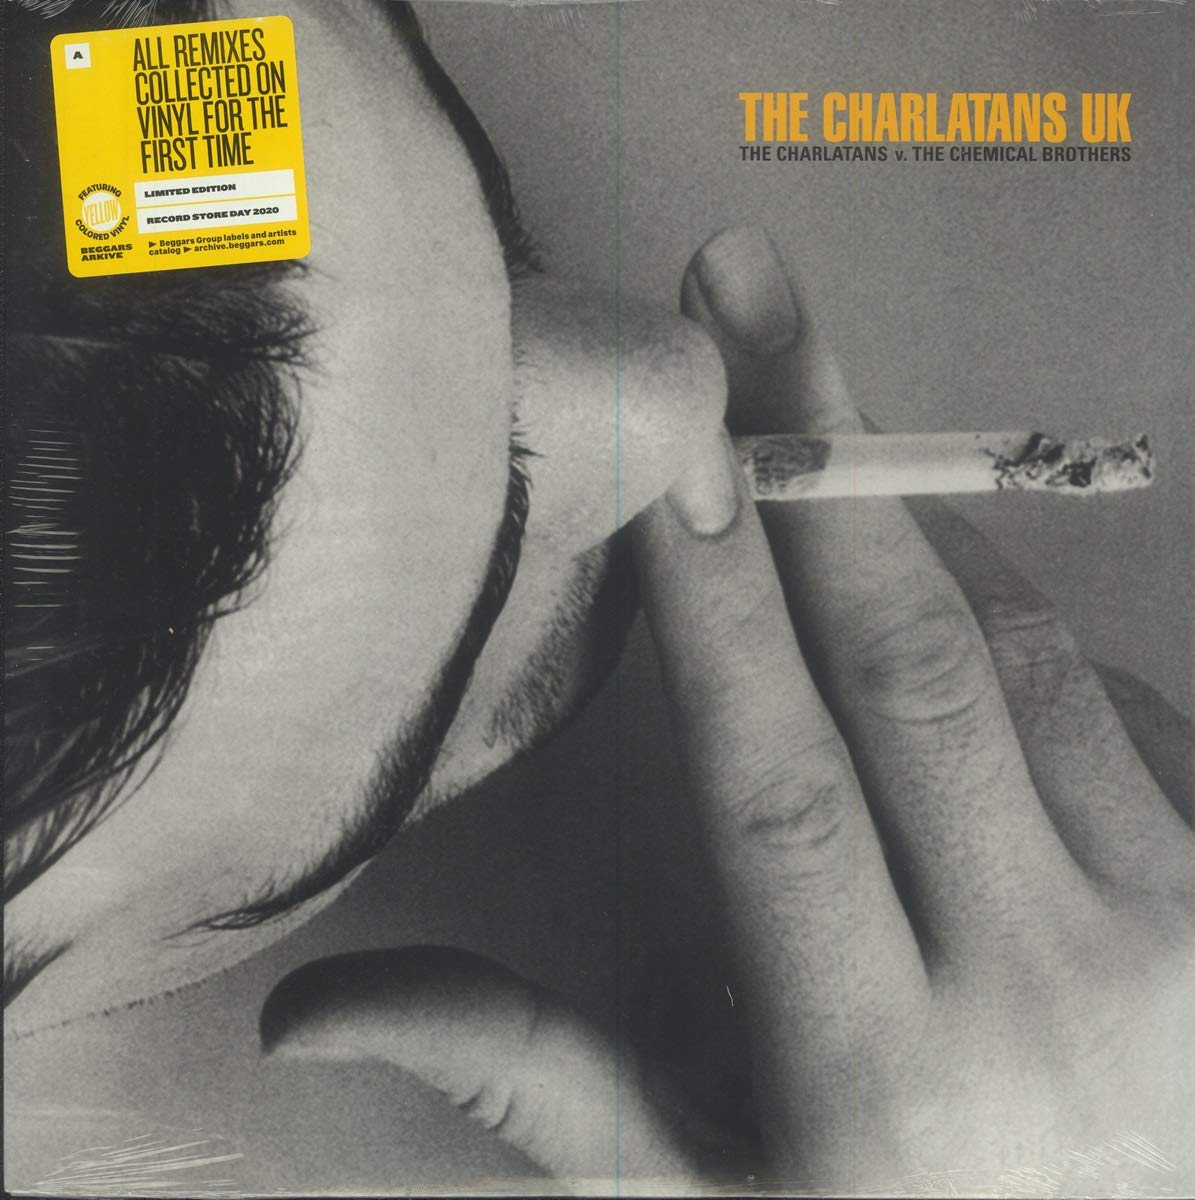 The Charlatans UK-The Charlatans V The Chemical Brothers-(BBQ2164LPE)-LIMITED EDITION-VINYL-FLAC-2020-BEATOCUL Download